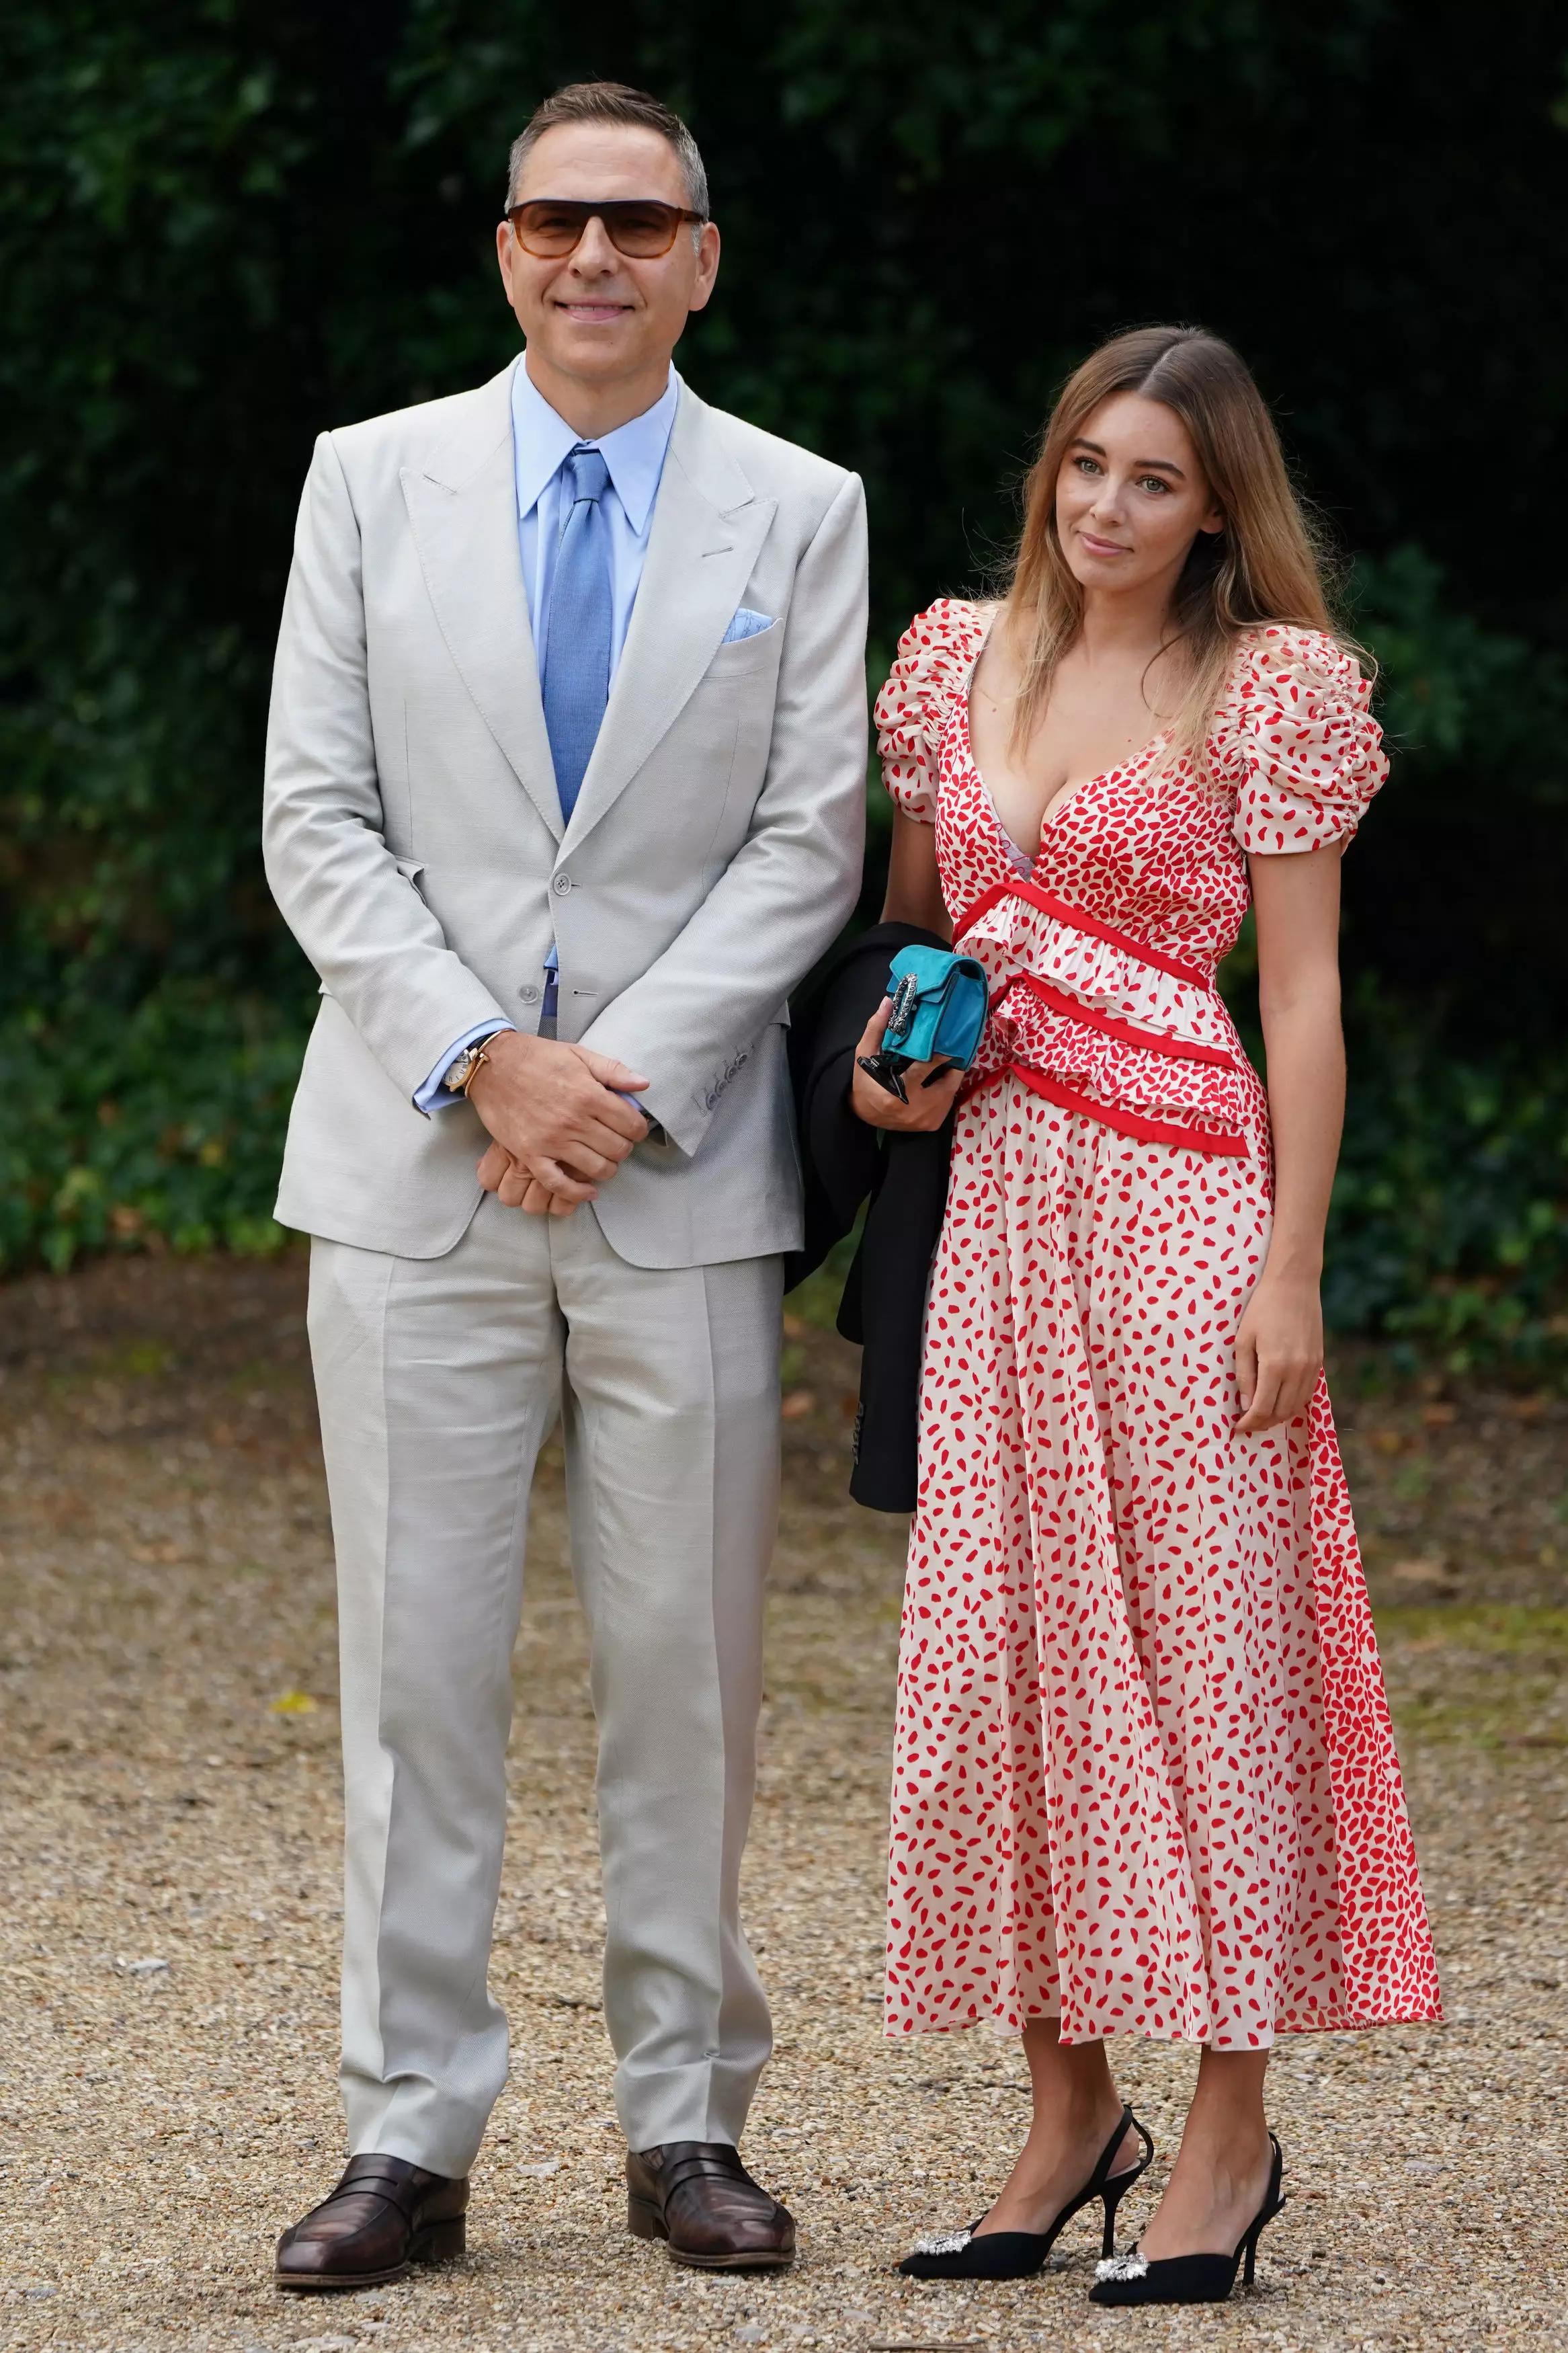 David Walliams and Keeley Hazell arriving at the ceremony.